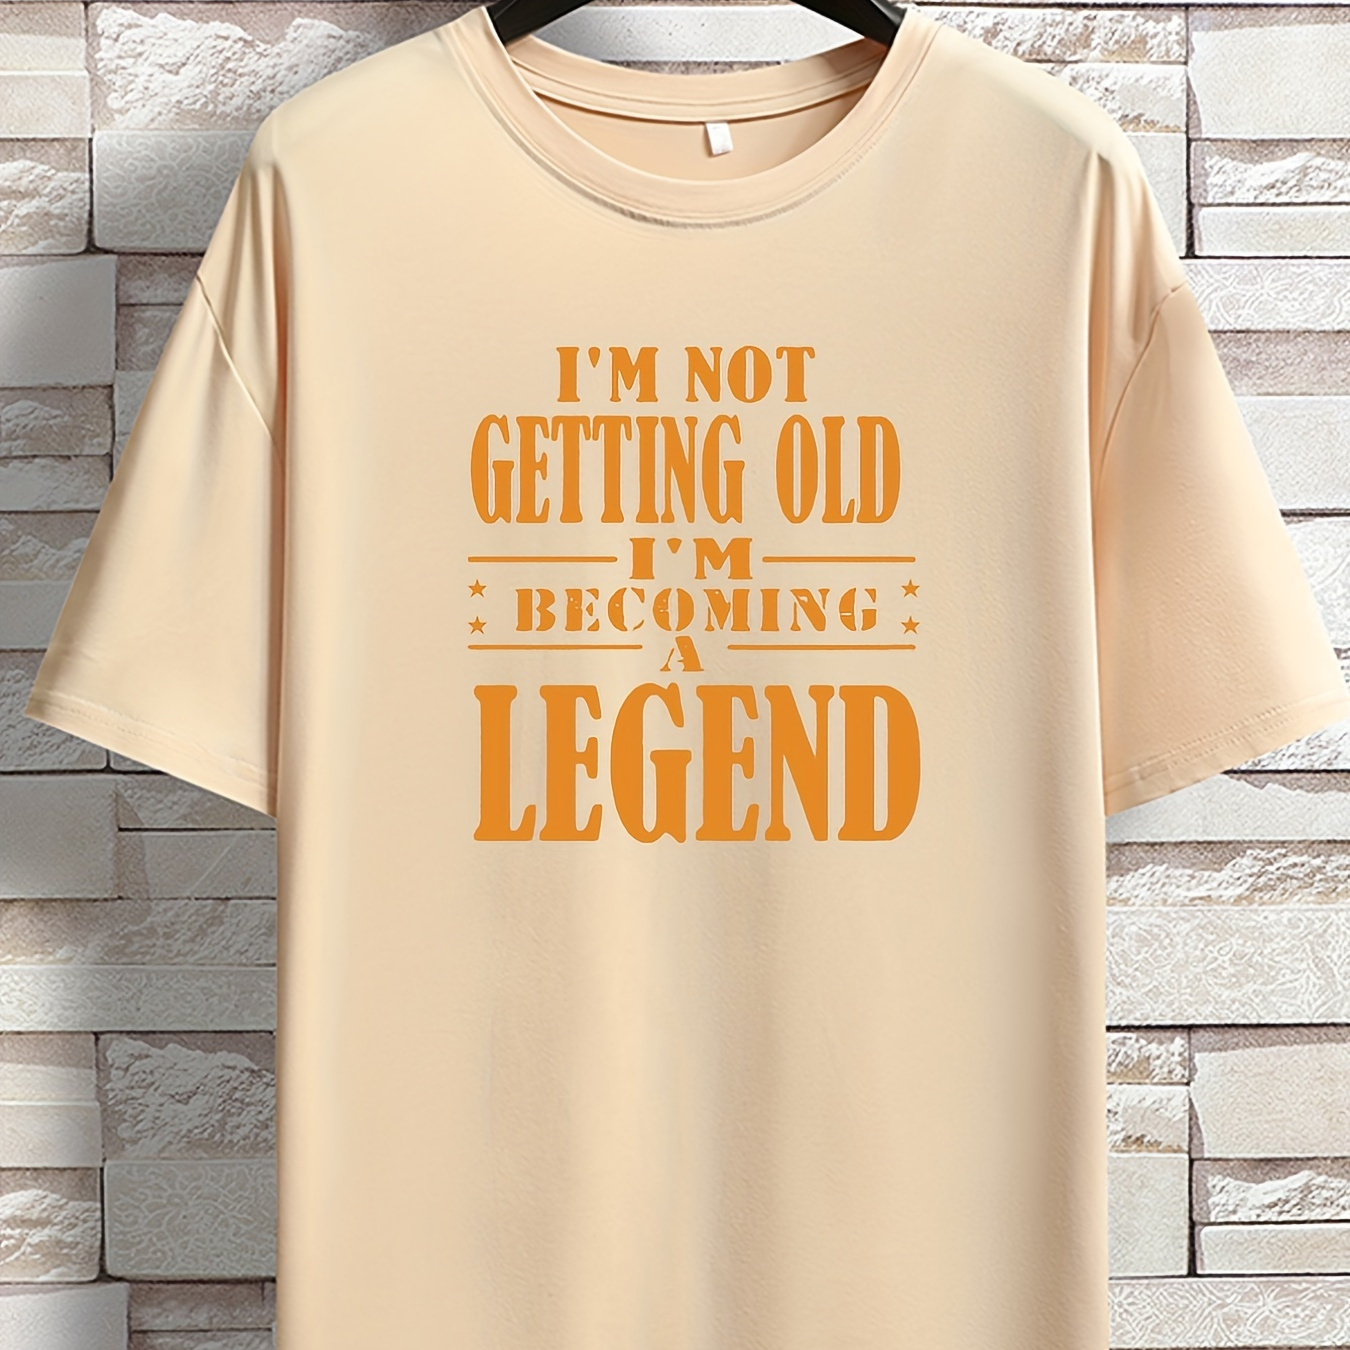 

Plus Size Men's Trendy "i'm Not Getting Old" Graphic Tees, Comfy Stretch Breathable T-shirts For Summer, Oversized Loose Men's Clothings